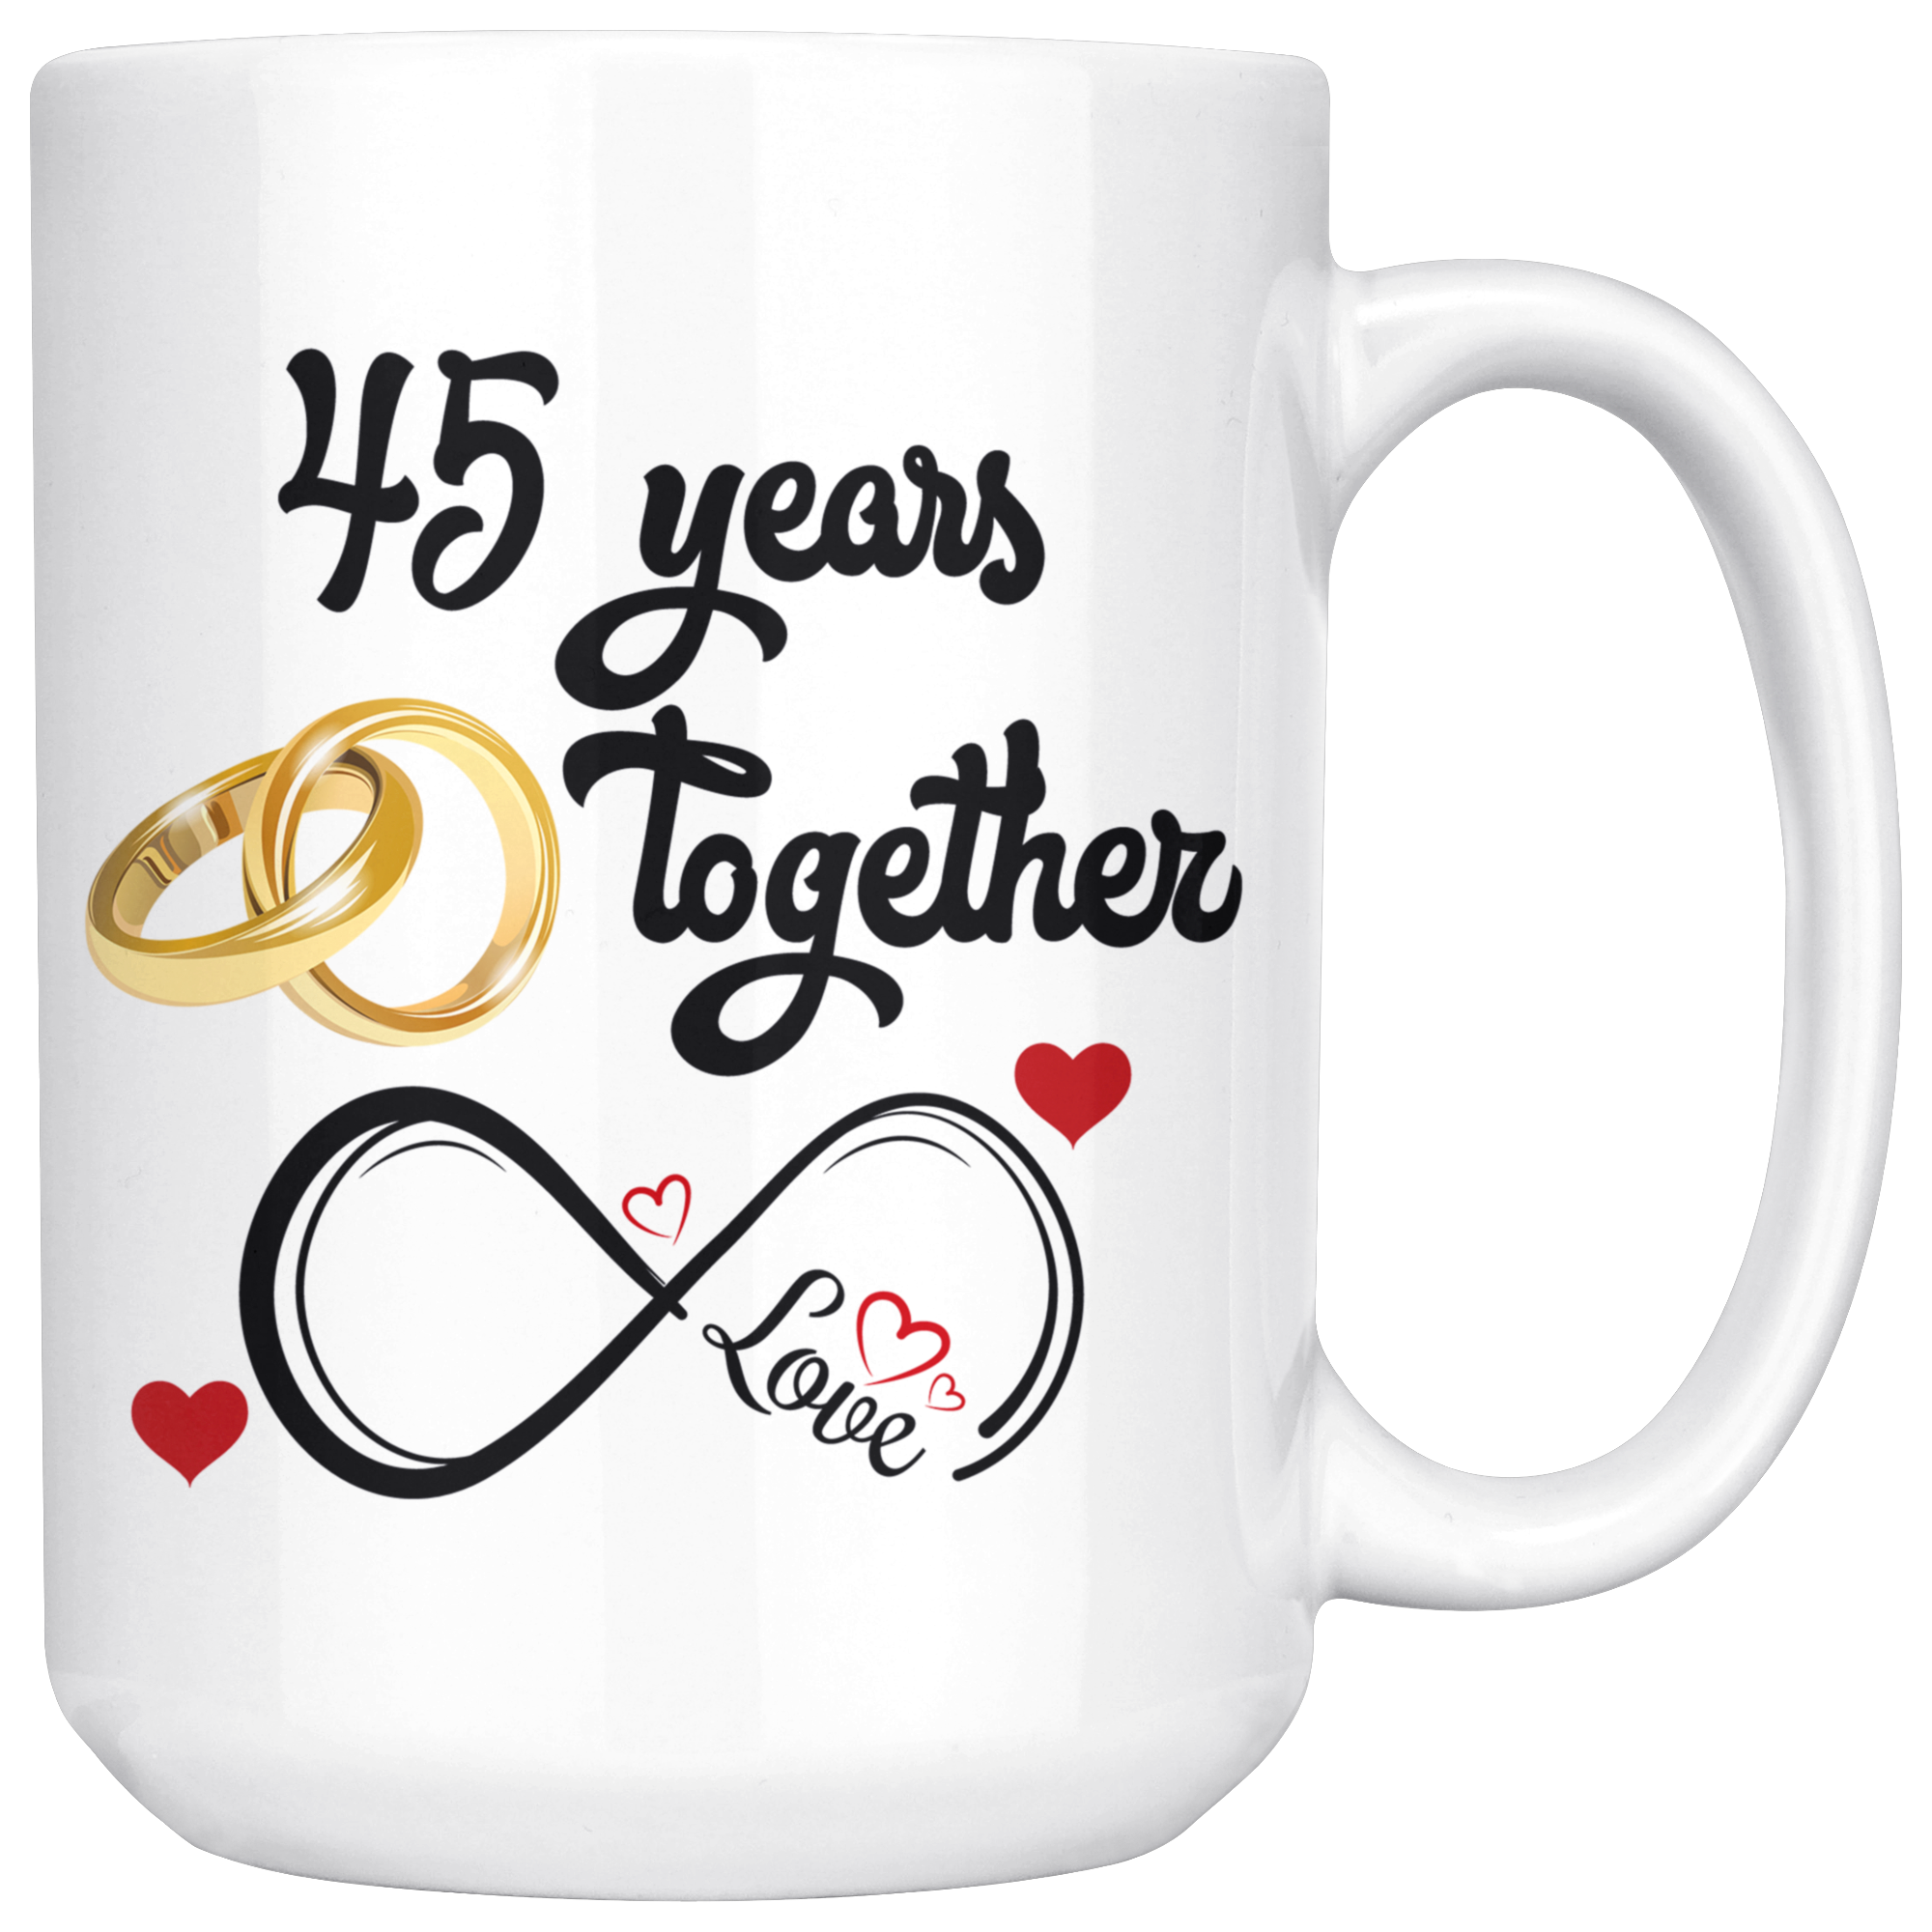 45th Anniversary Gifts for Men / 45 Year Anniversary for Him / 45